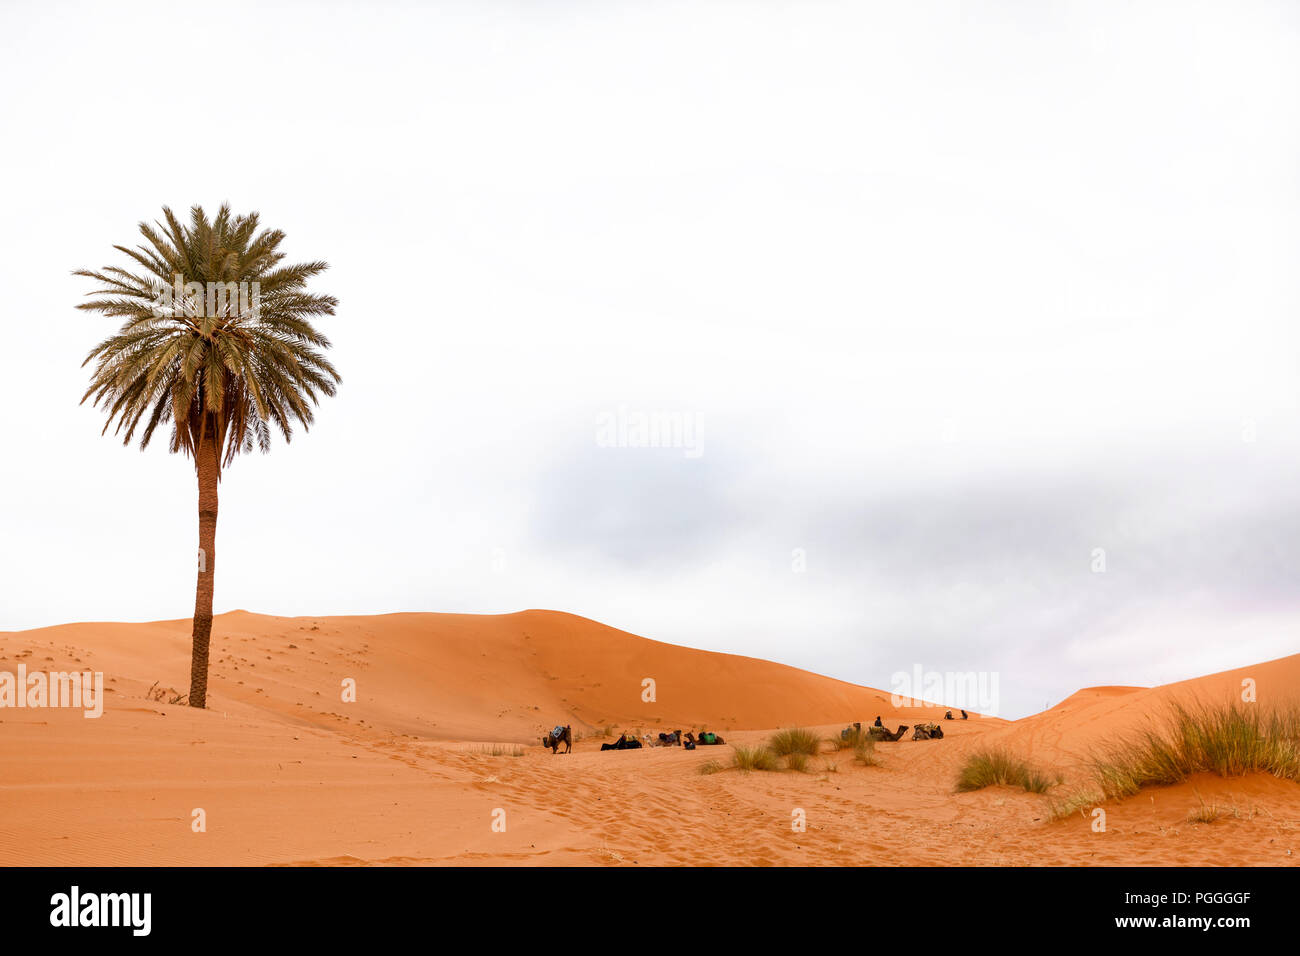 Morocco single giant palm tree in the Sahara desert sand dunes. People and camels show scale of the huge tree. Stock Photo